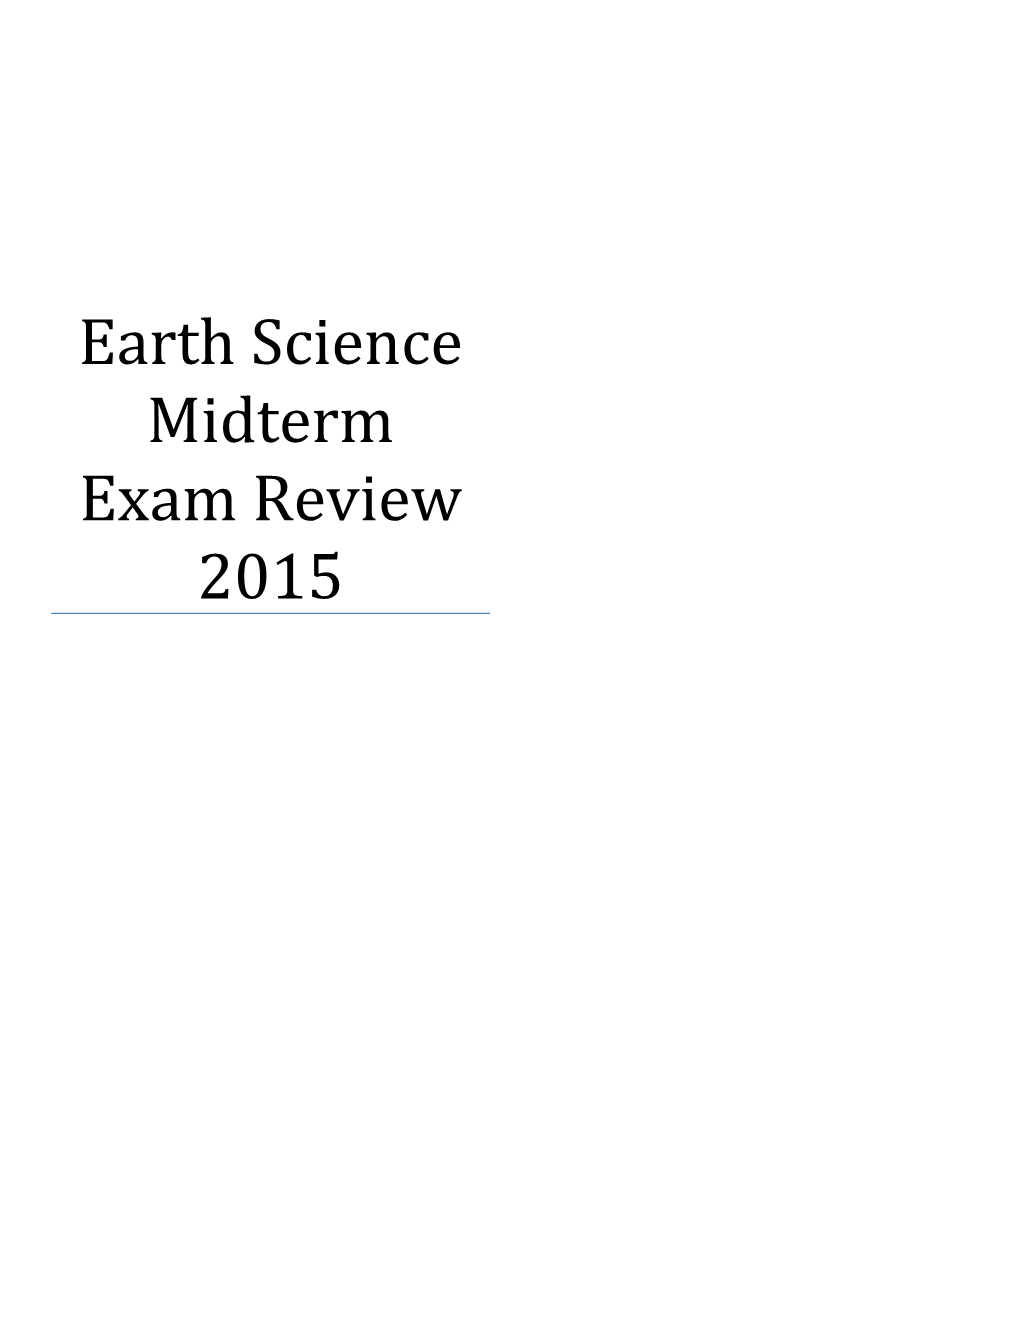 Earth Science Midterm Exam Review 2015